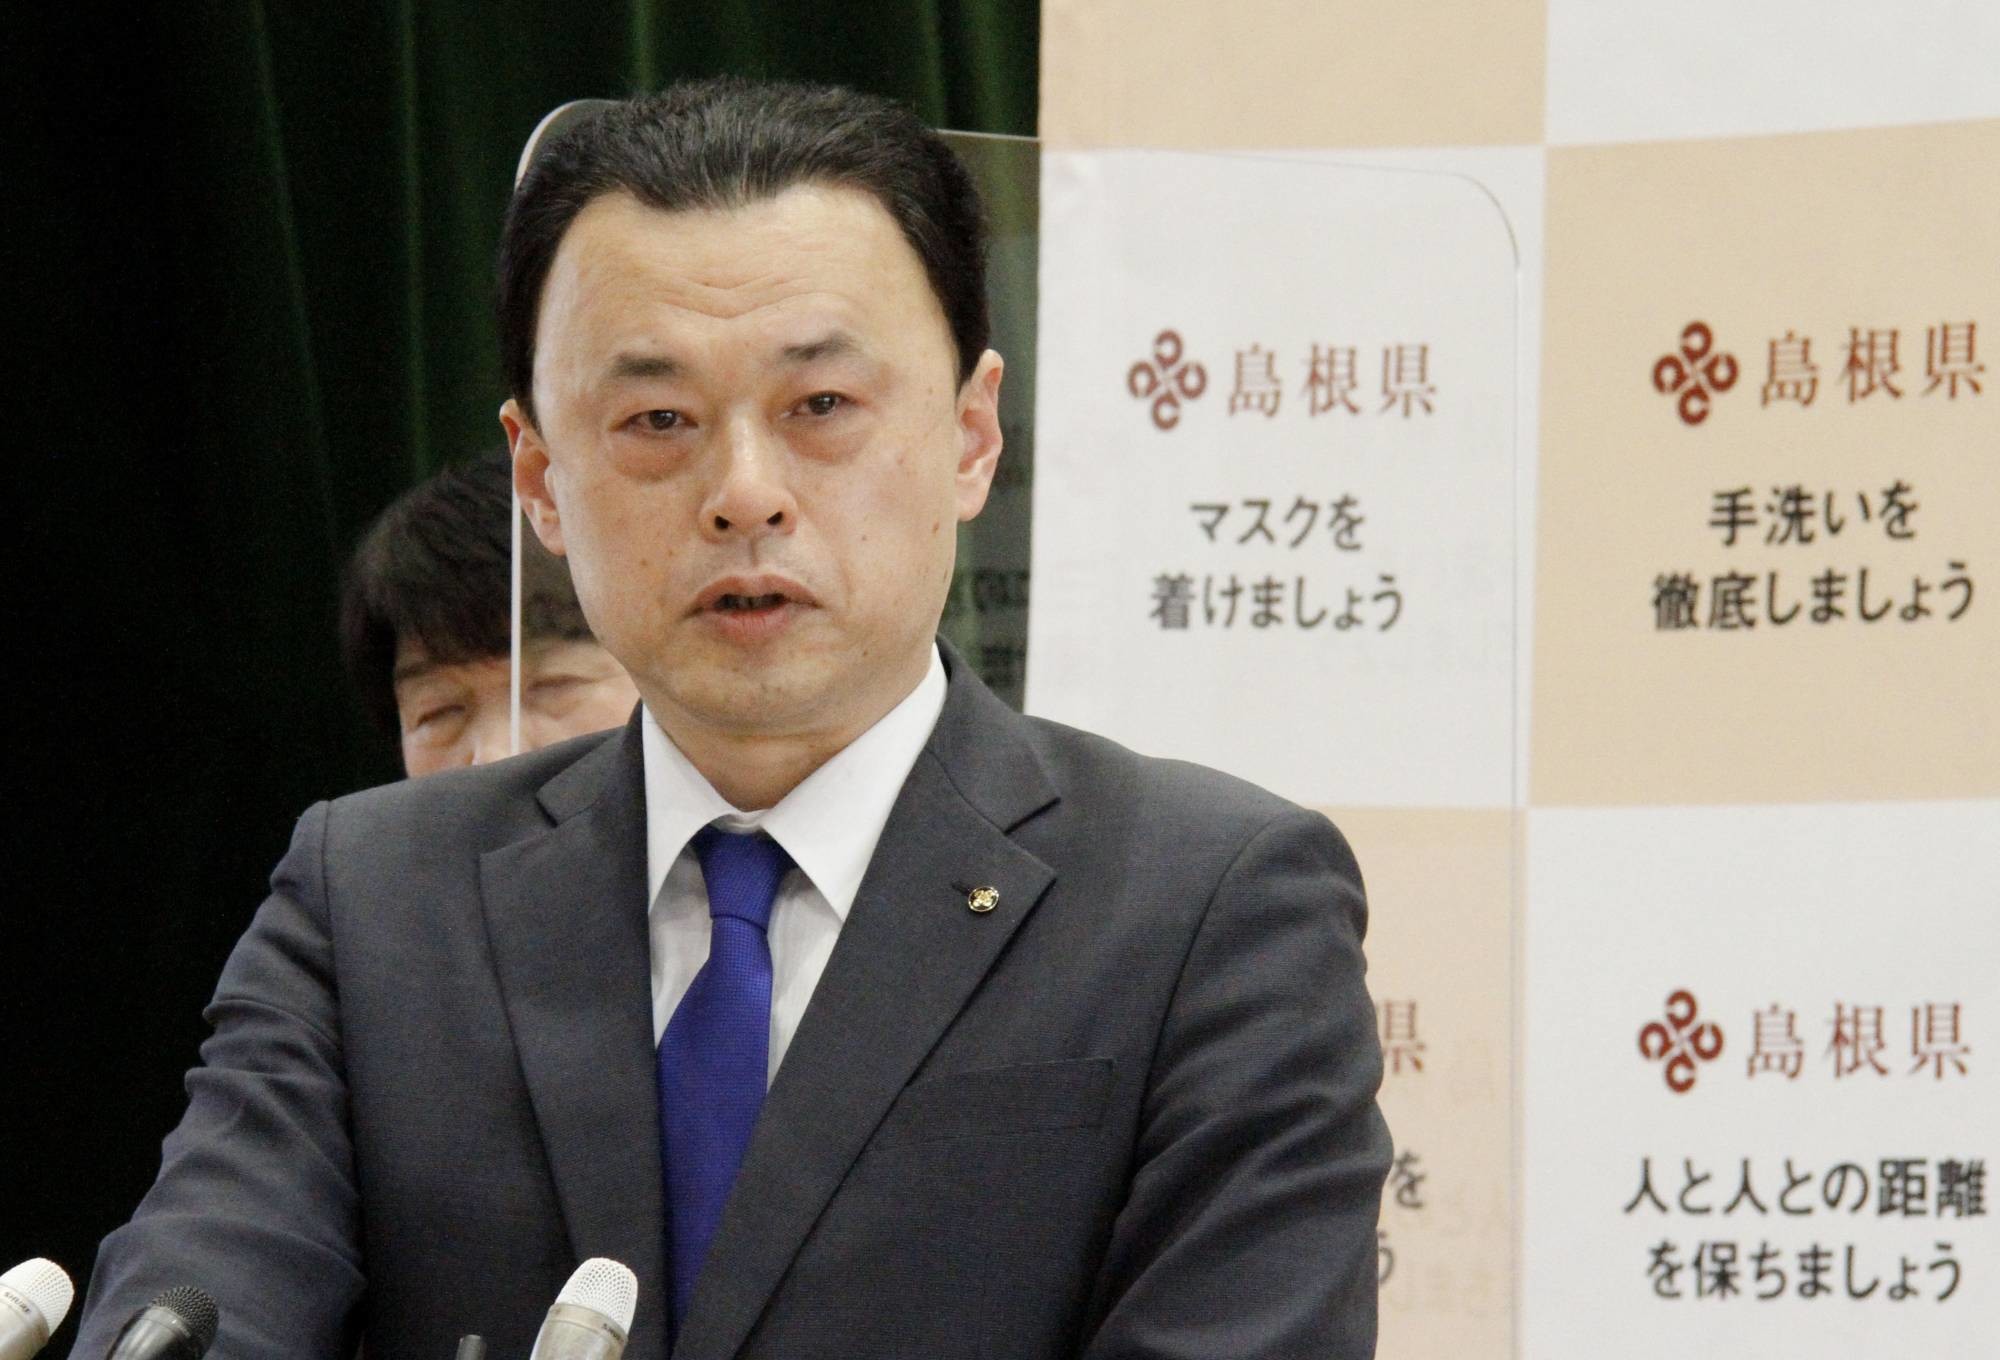 Prefecture governor Tatsuya Maruyama wants 2021 Olympics and torch relay cancelled